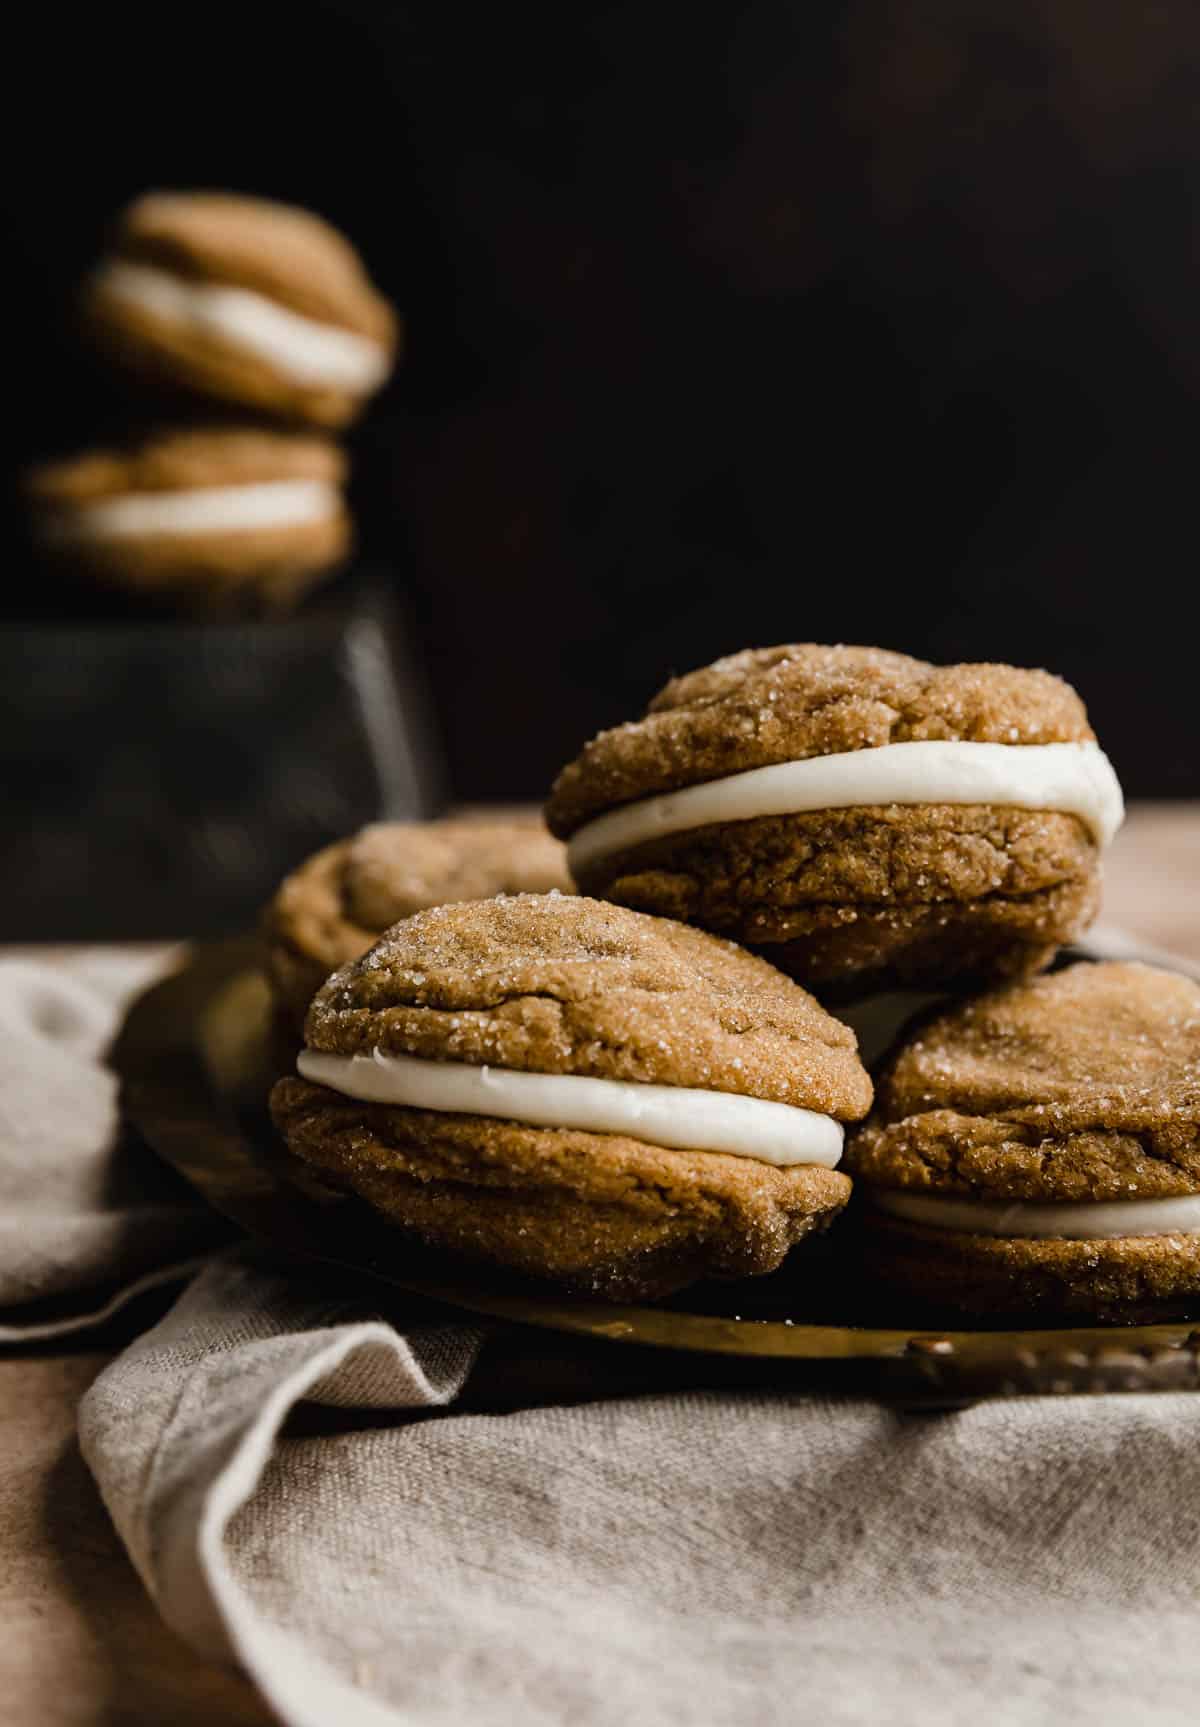 Gingerbread Whoopie pies with a cream cheese filling, stacked on a bronze plate against a brown background.